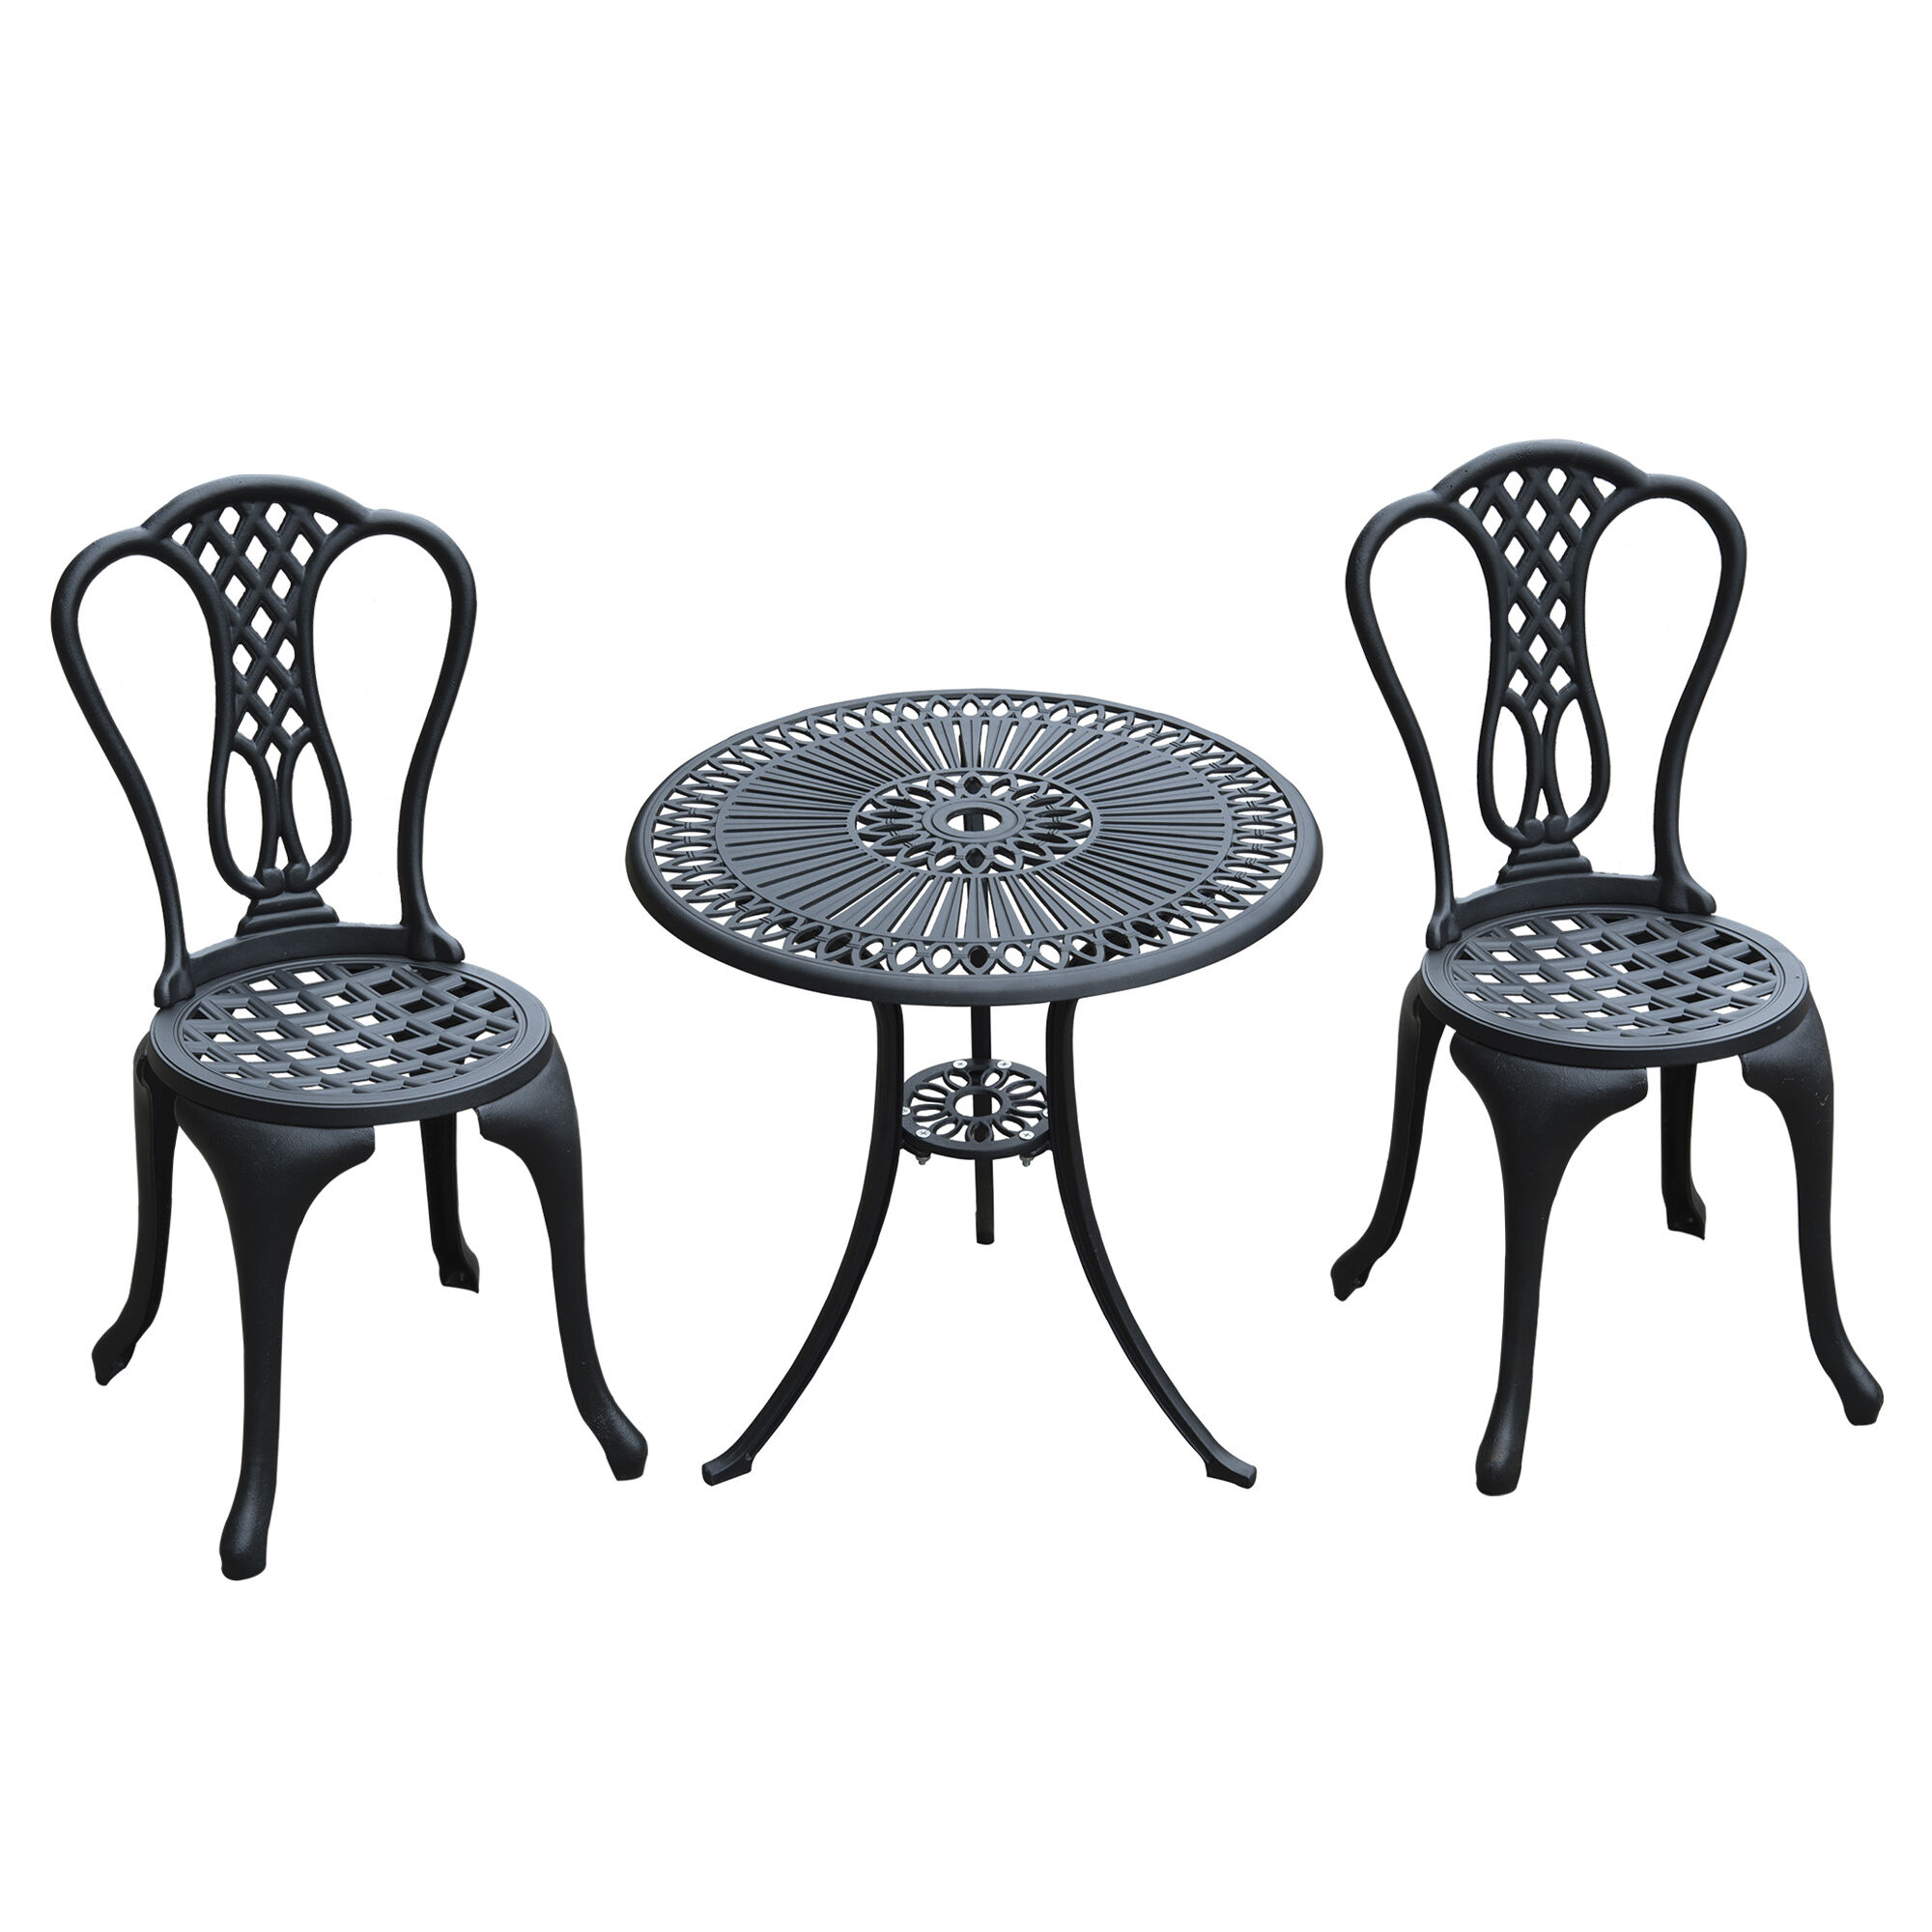 Outsunny HOMCOM 3 Piece Patio Cast Aluminium Bistro Set Garden Outdoor Furniture Table and Chairs Shabby Chic Style